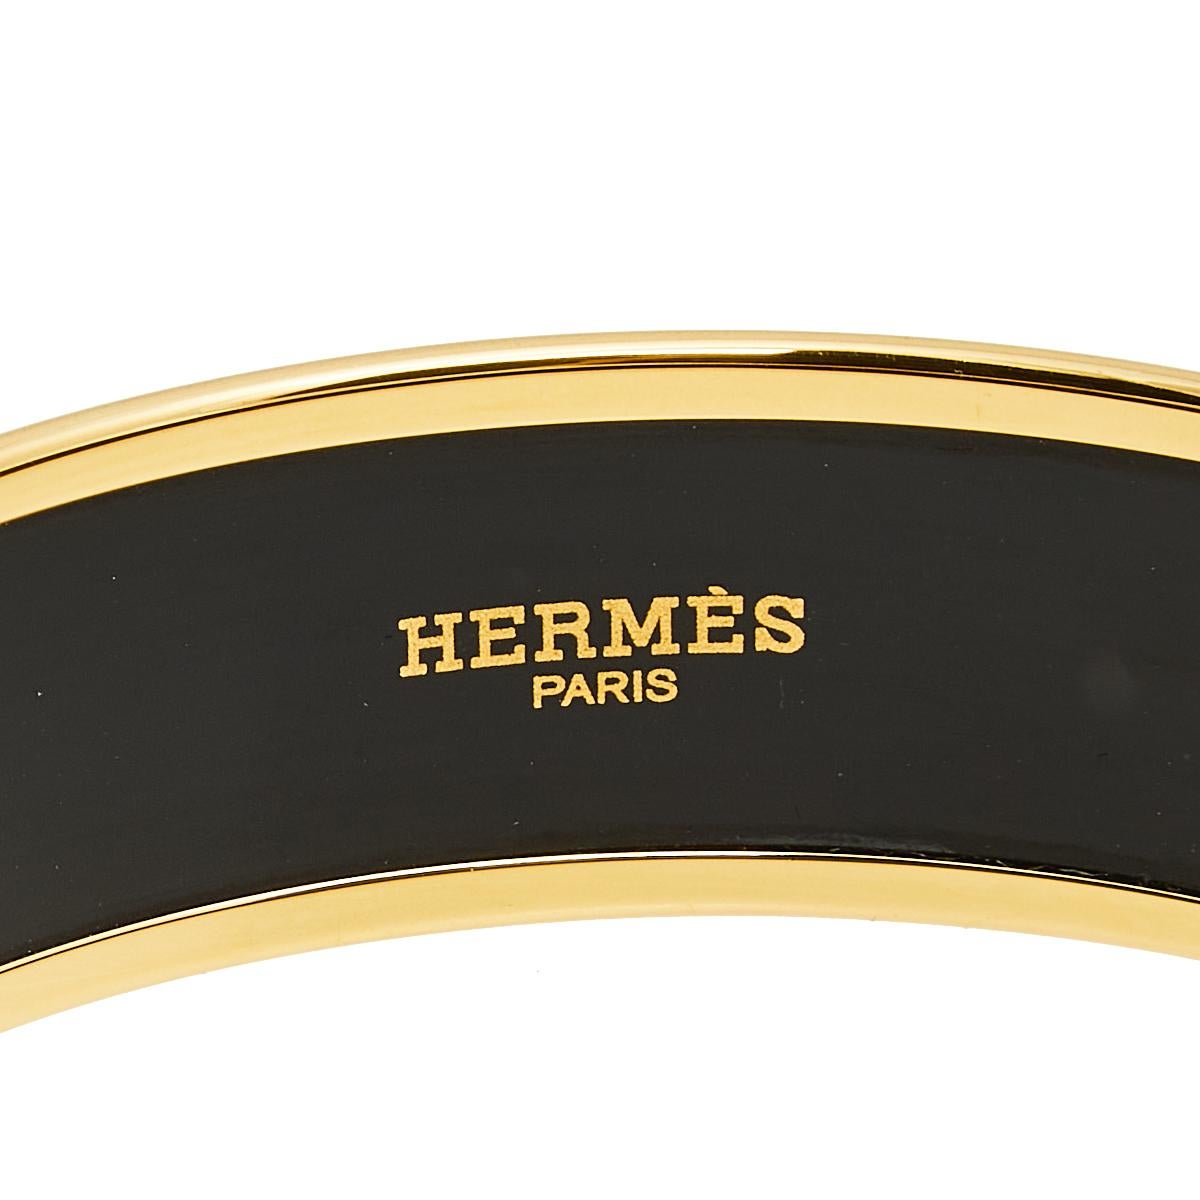 A classic Hermes bangle bracelet is so simple, effortless and yet so chic and luxurious that it is loved my luxury lovers all over the world. Constructed in gold plated metal, this bangle is further enhanced with caleche orange enamel coating all